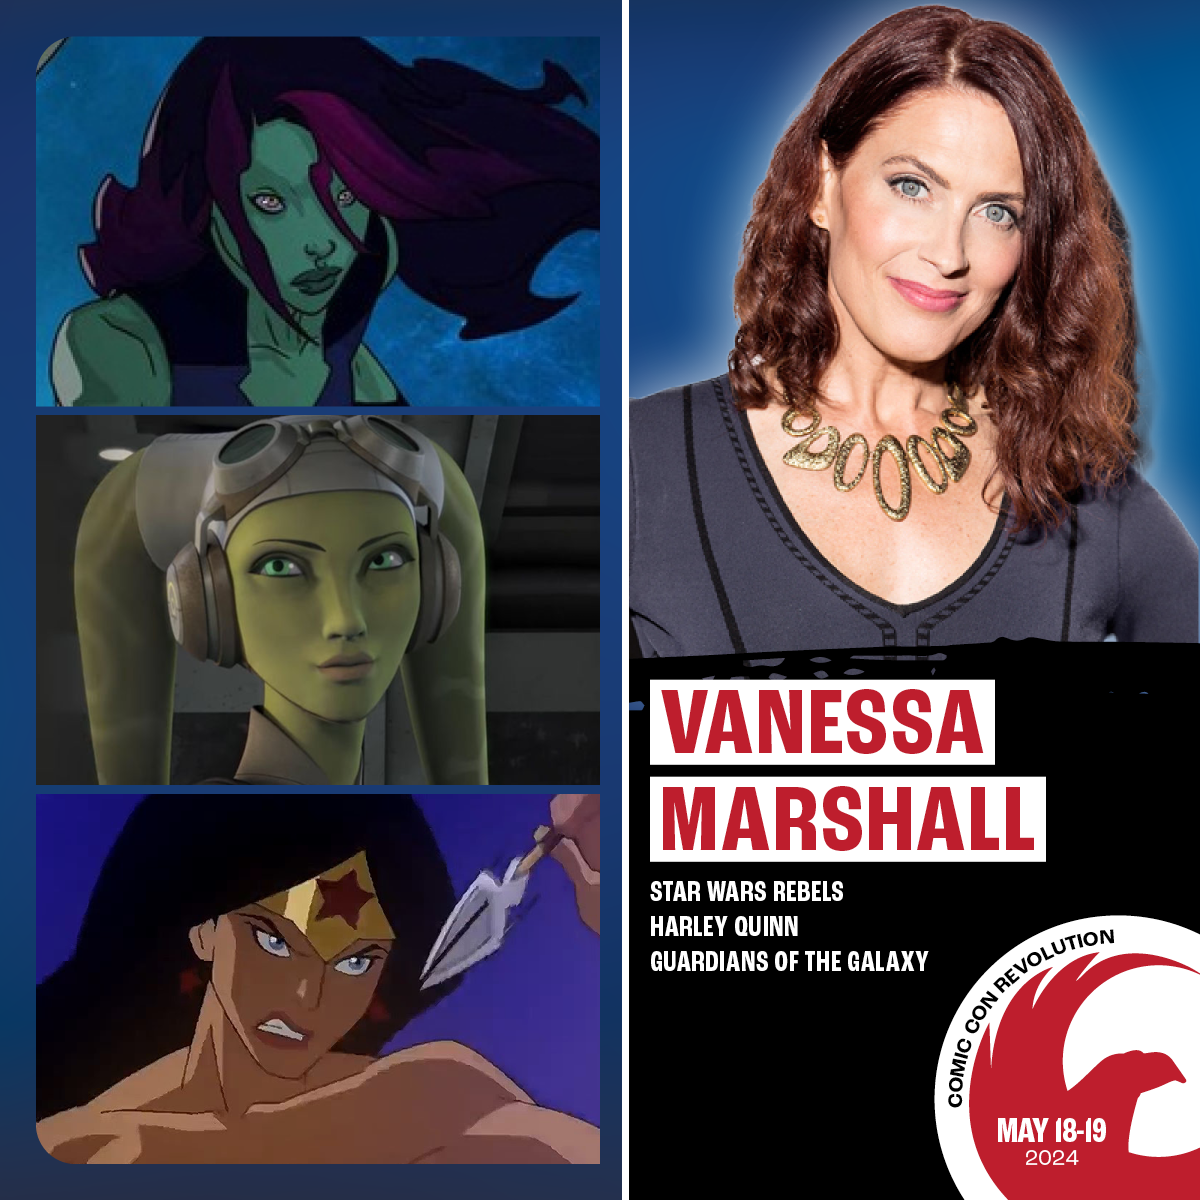 Vanessa marshall's podcast with the characters from star wars.